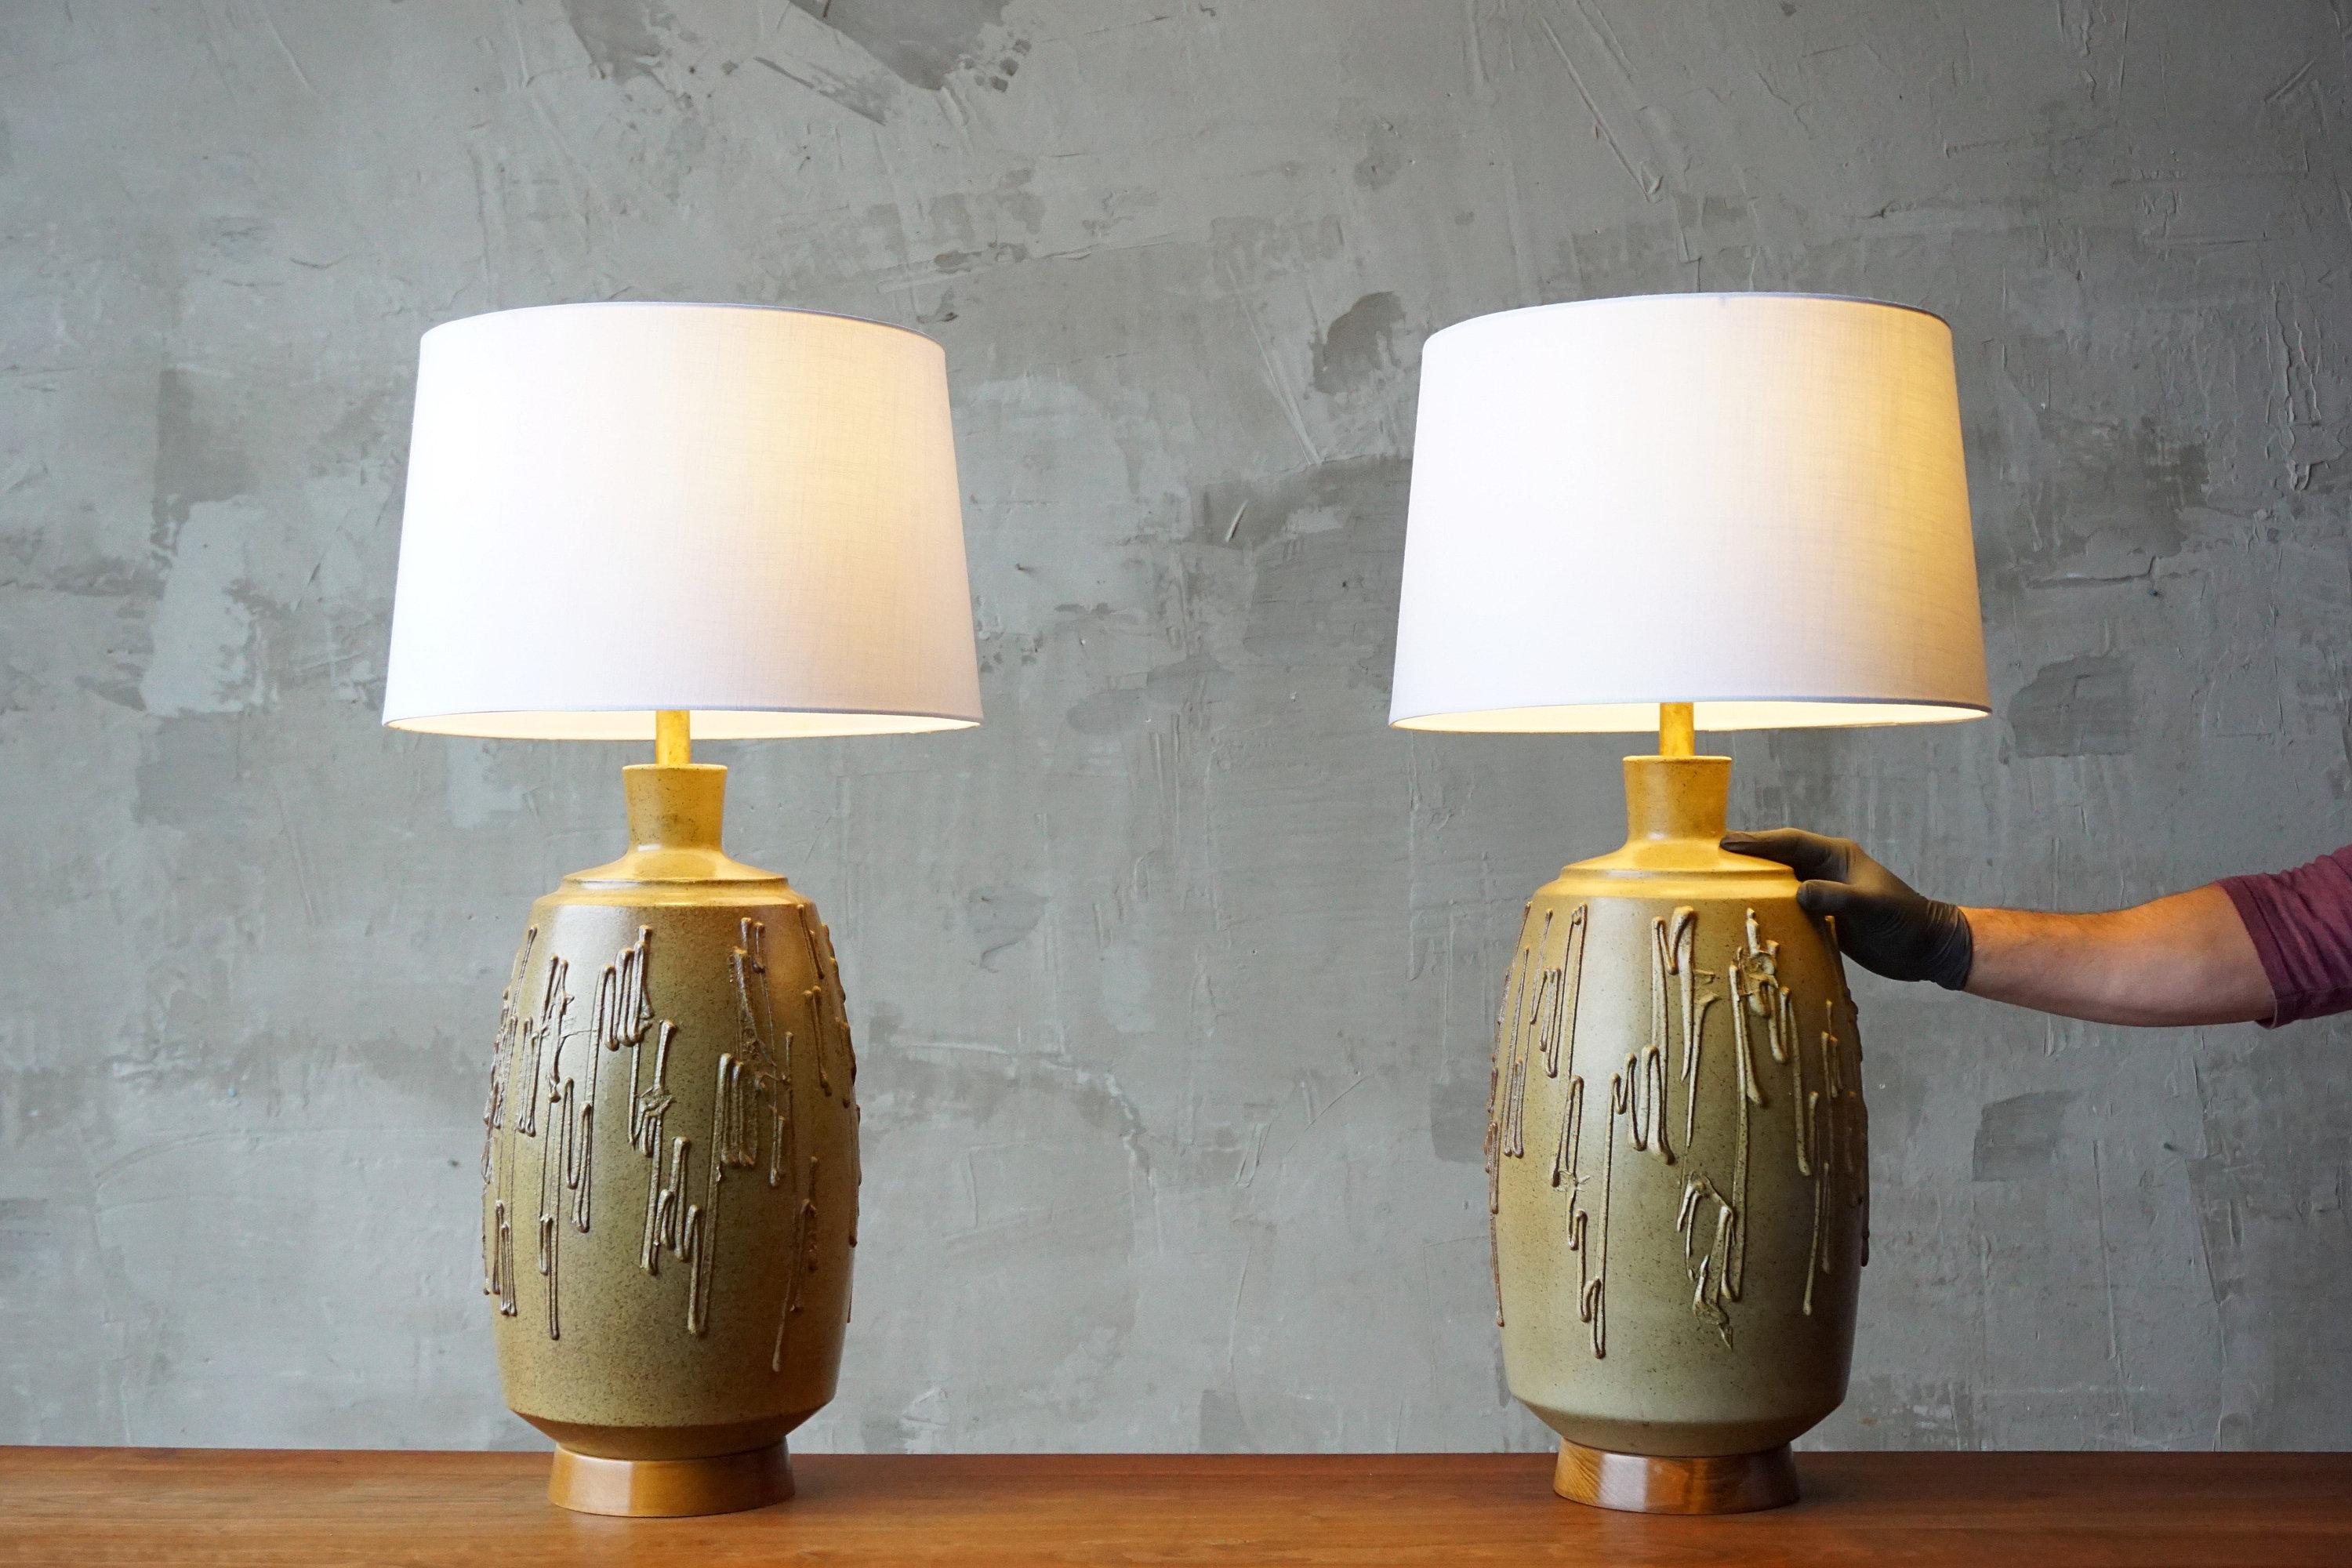 Pair of textured and glazed ceramic lamp designed by David Cressey for California company, Architectural Pottery. 

Both in excellent original condition. 

Each measures approximately 26”H to bulb socket base. Ceramic portion measures 20”H x